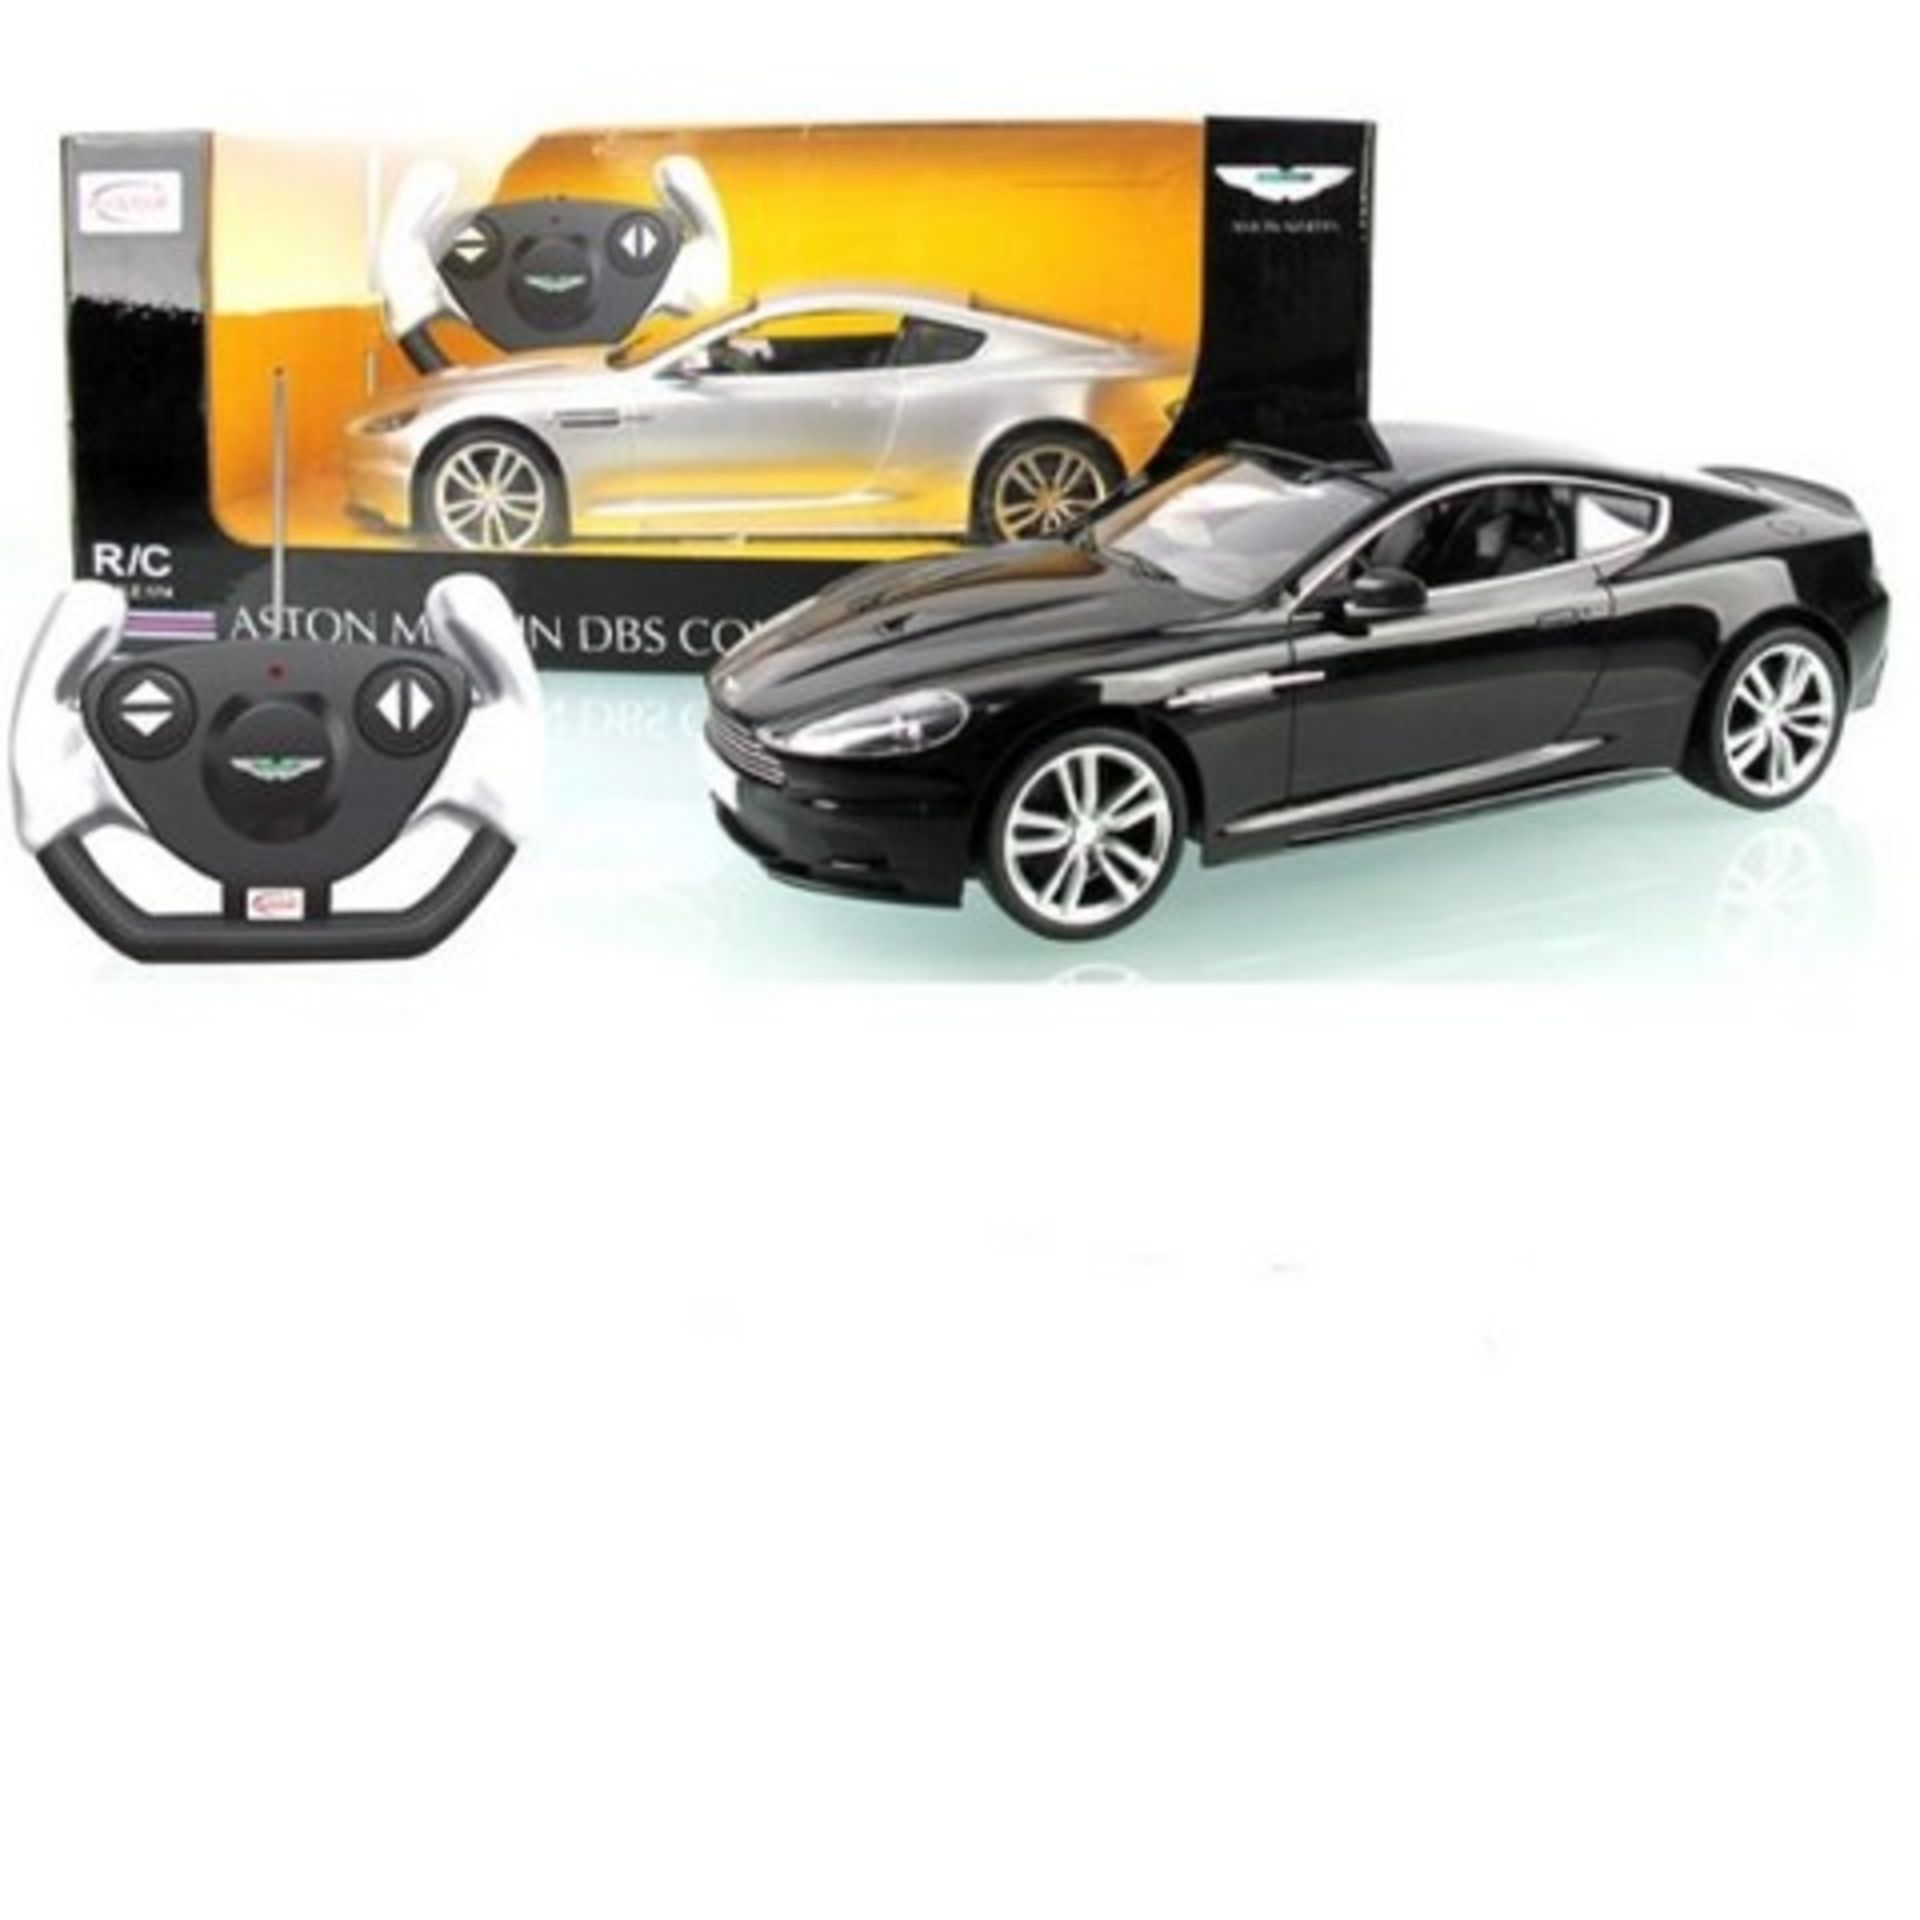 + VAT Brand New 1:14 Scale Aston Martin DBS Coupe